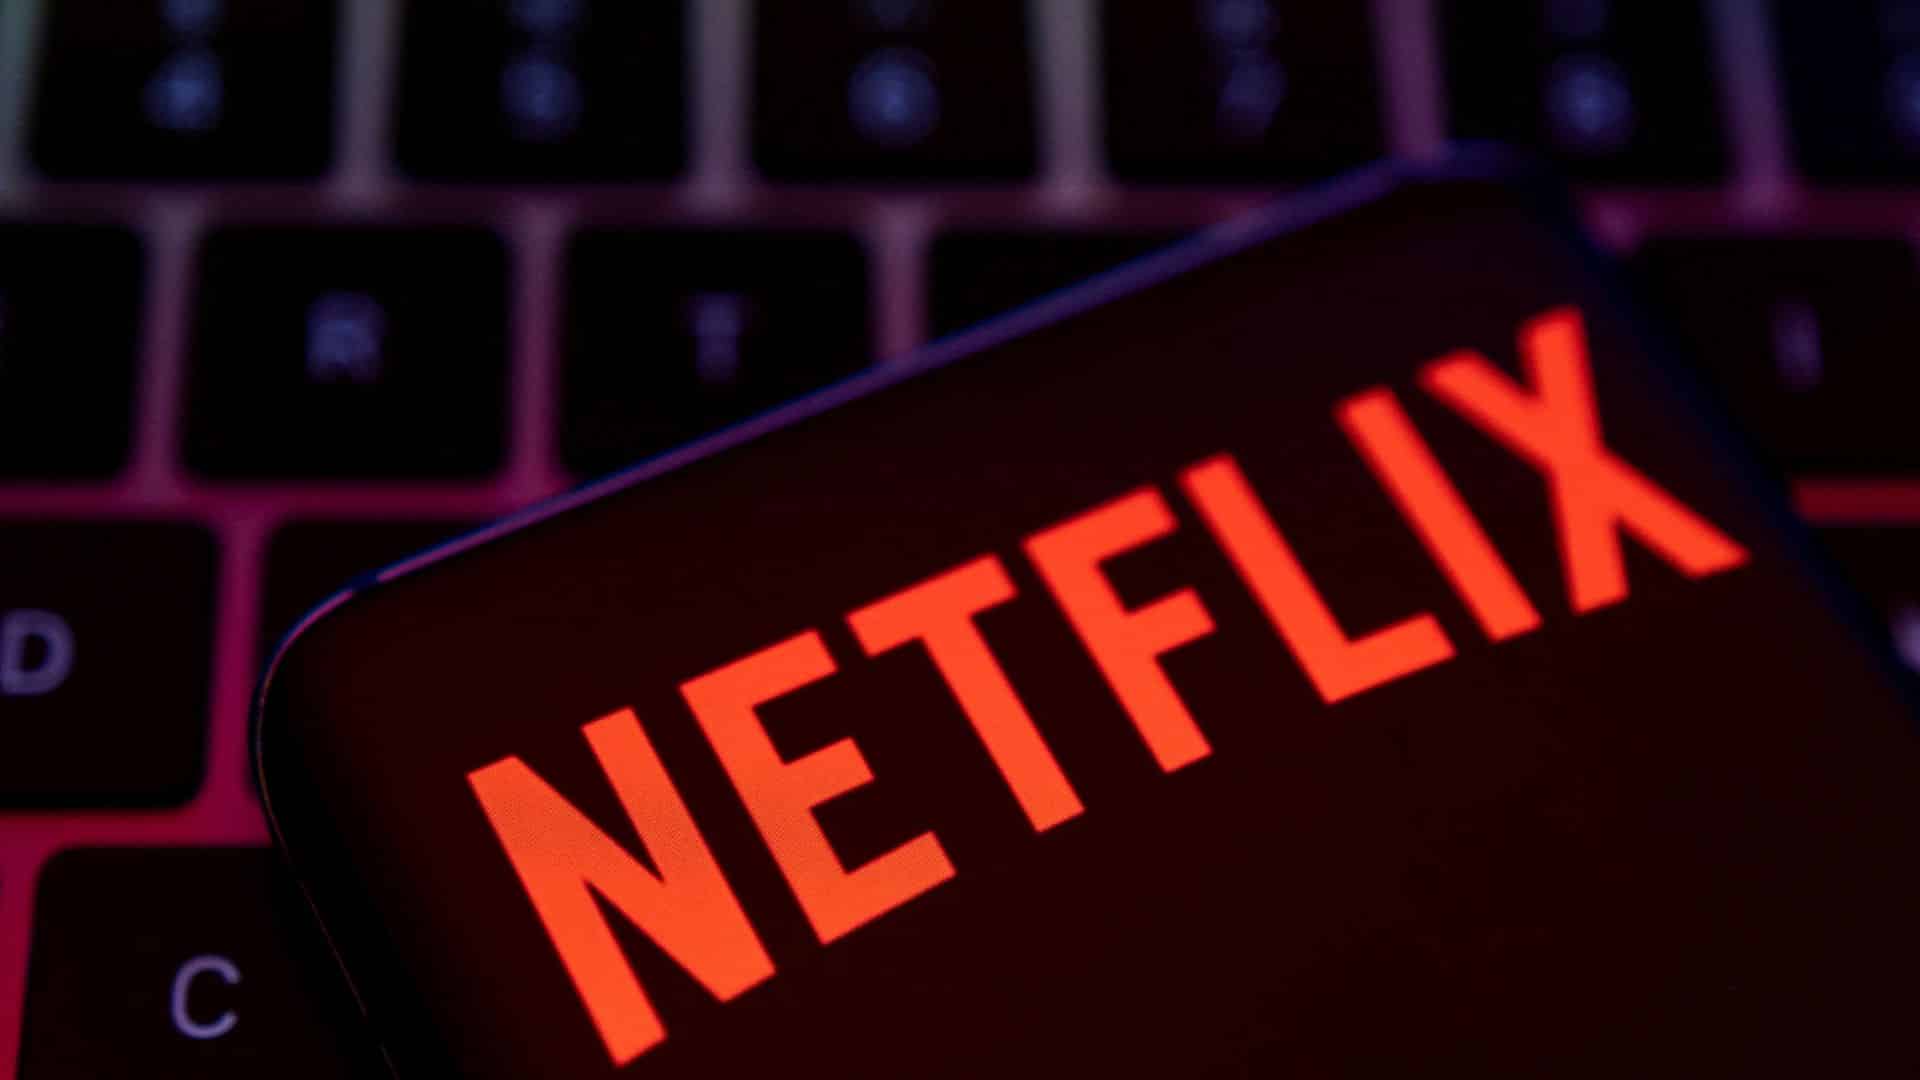 Netflix Users Sharing Password Could Face Criminal Charges